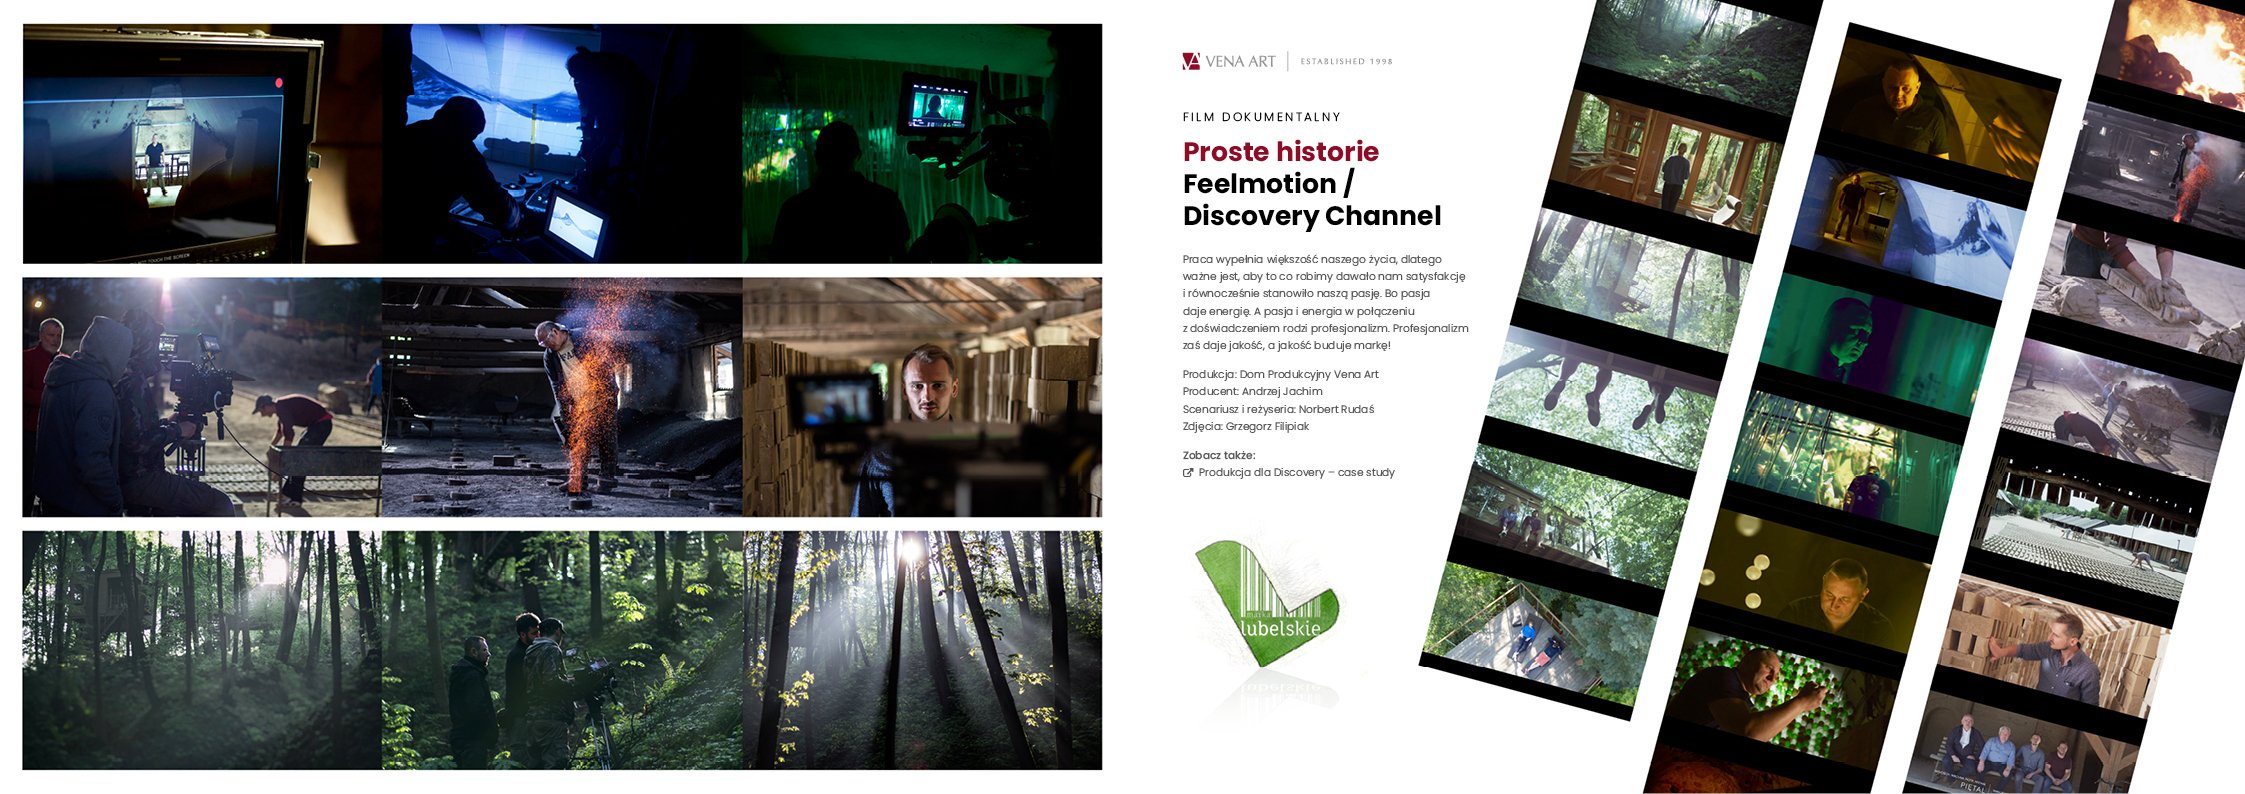 Proste historie — Feelmotion / Discovery Channel